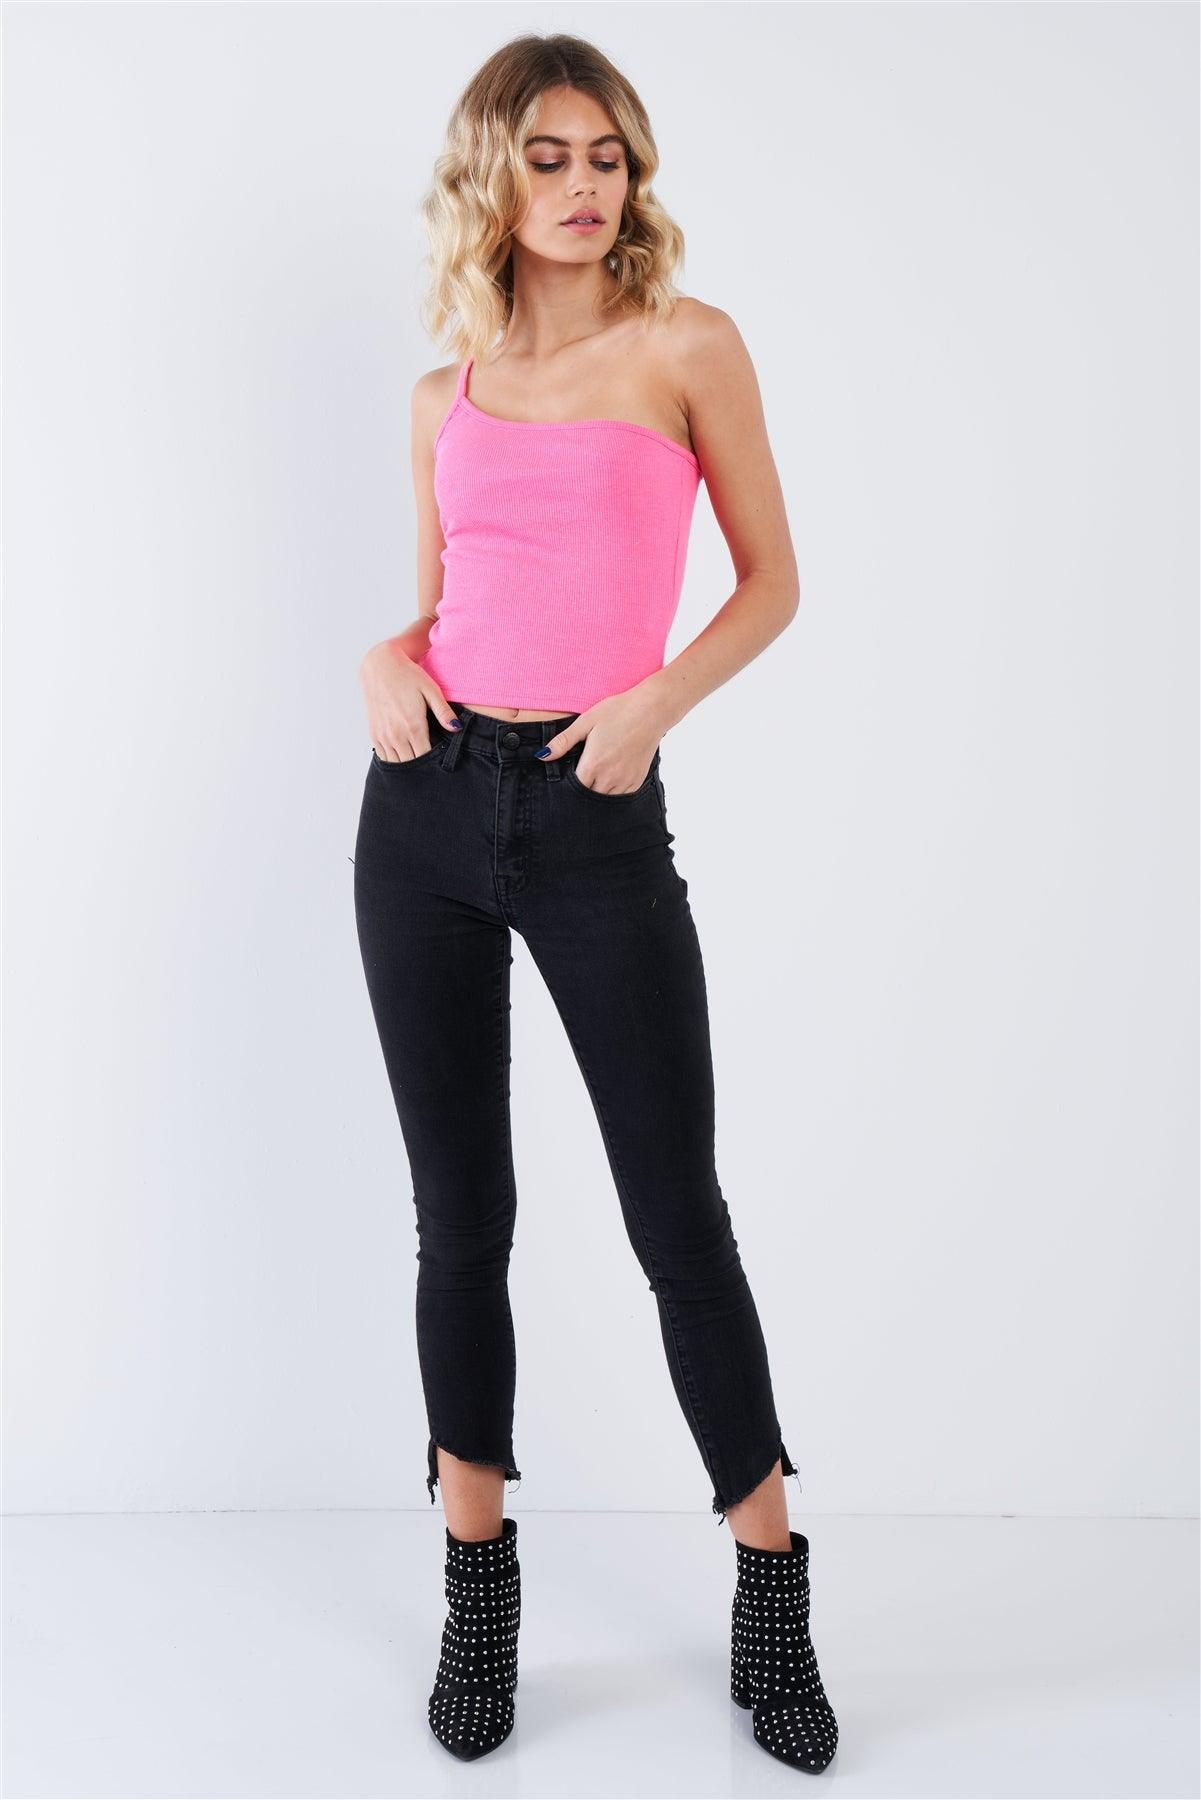 Sleeveless Neon Pink One Shoulder Rib Knit Top